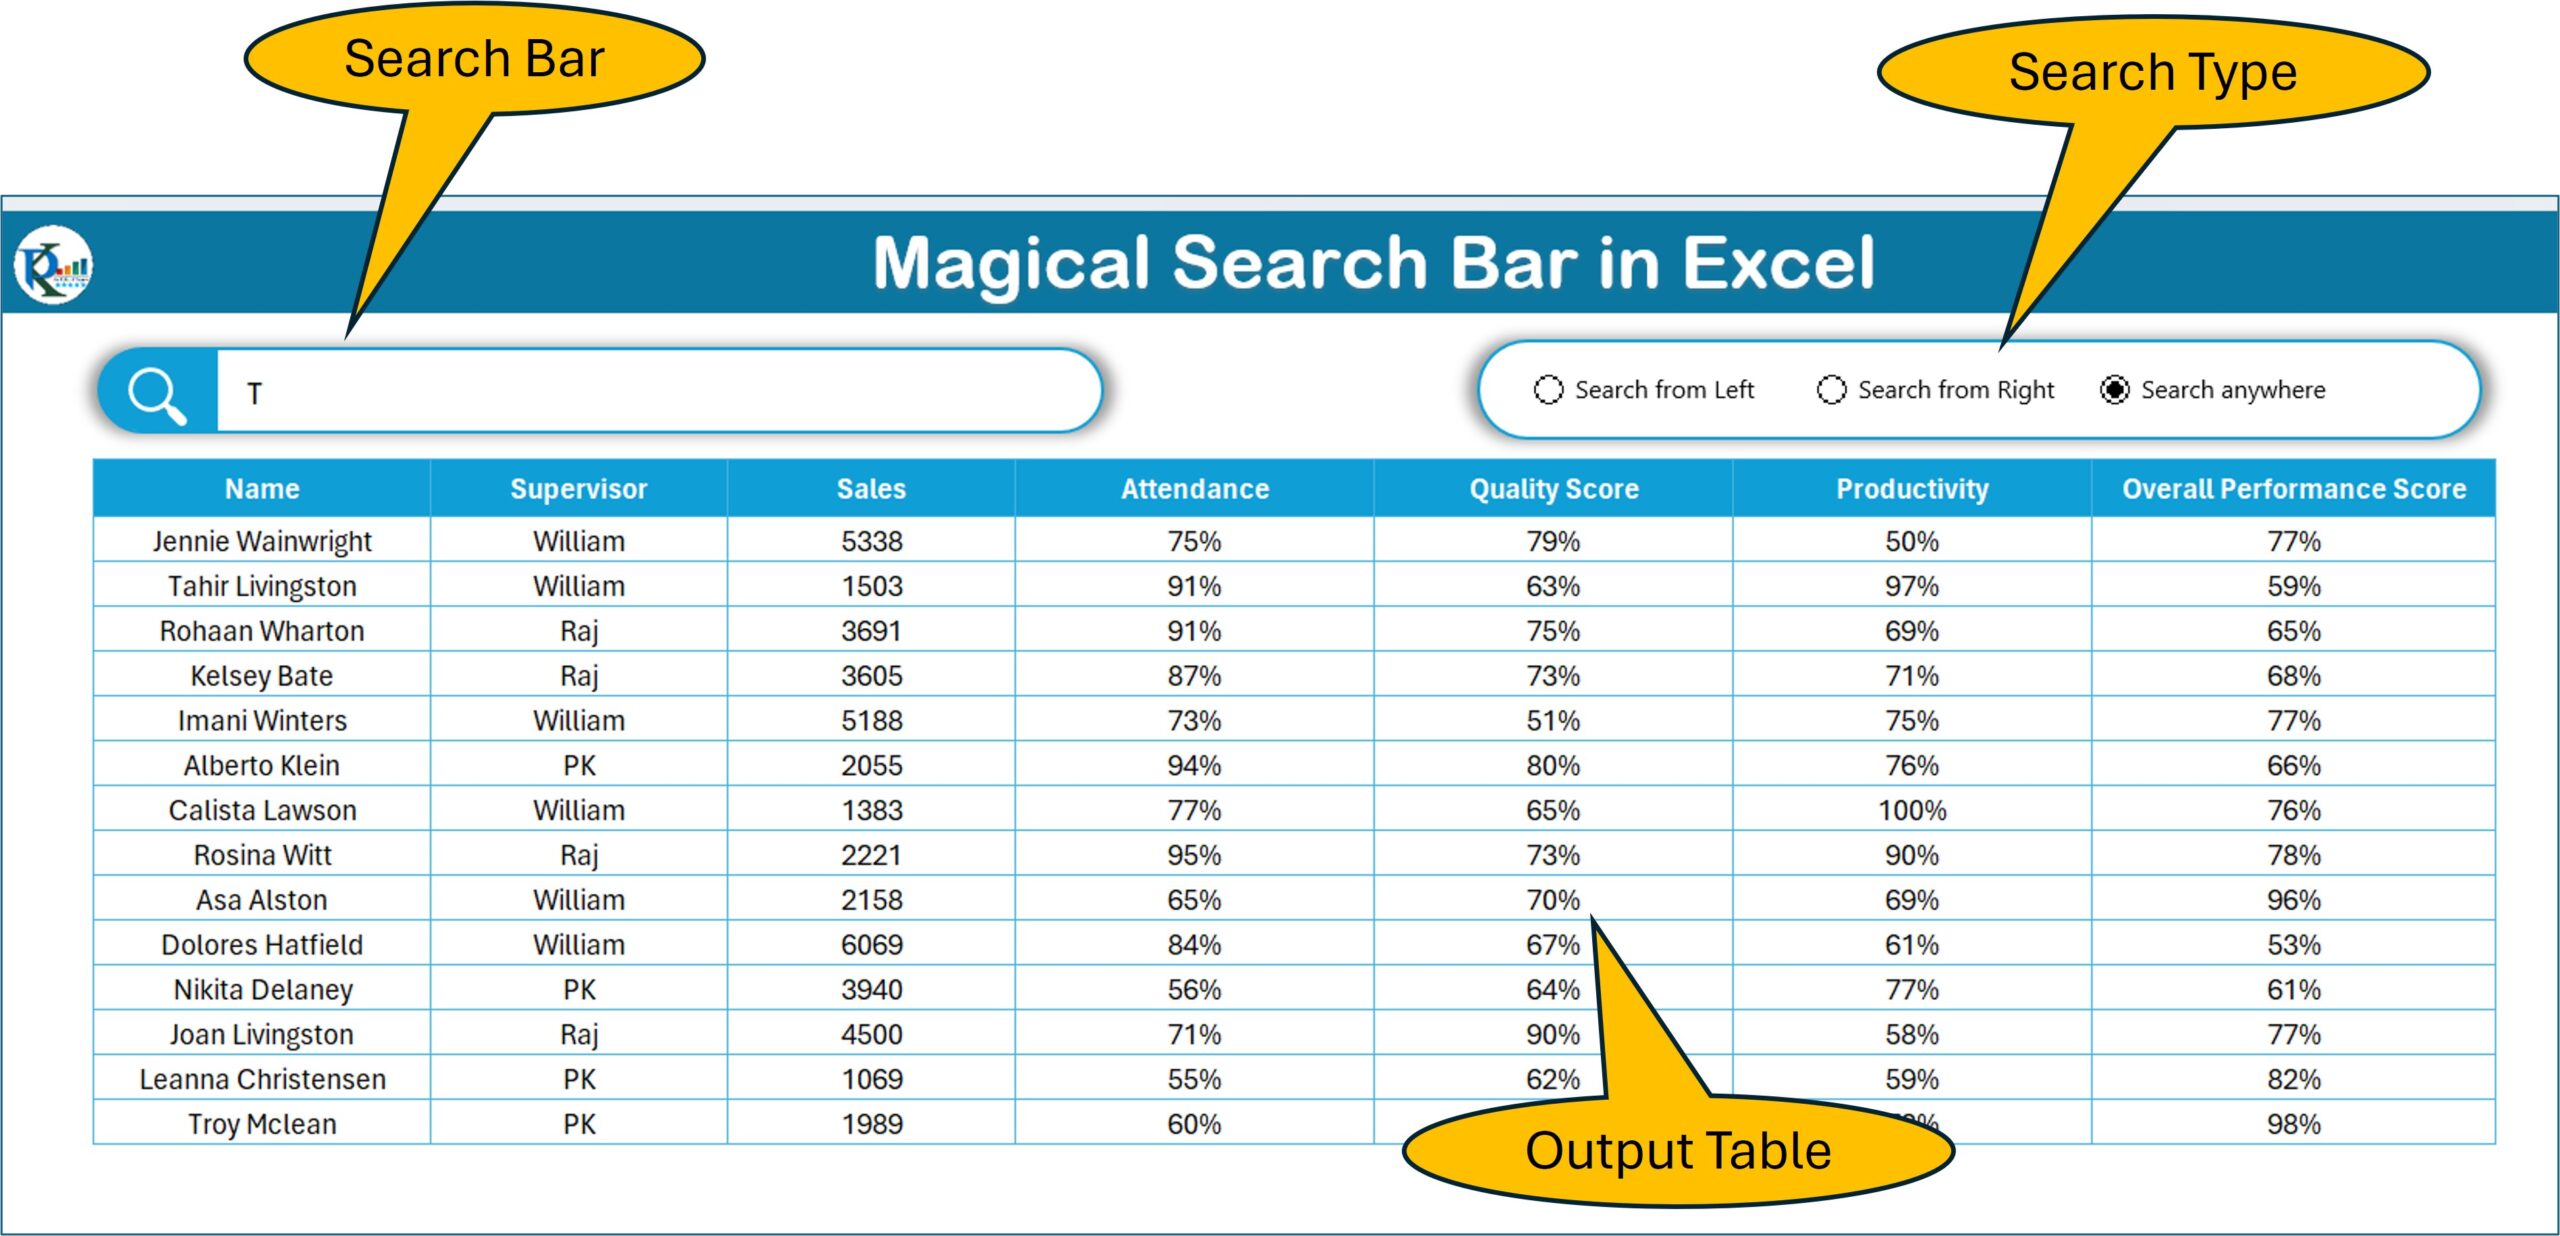 Magic Search Bar Features